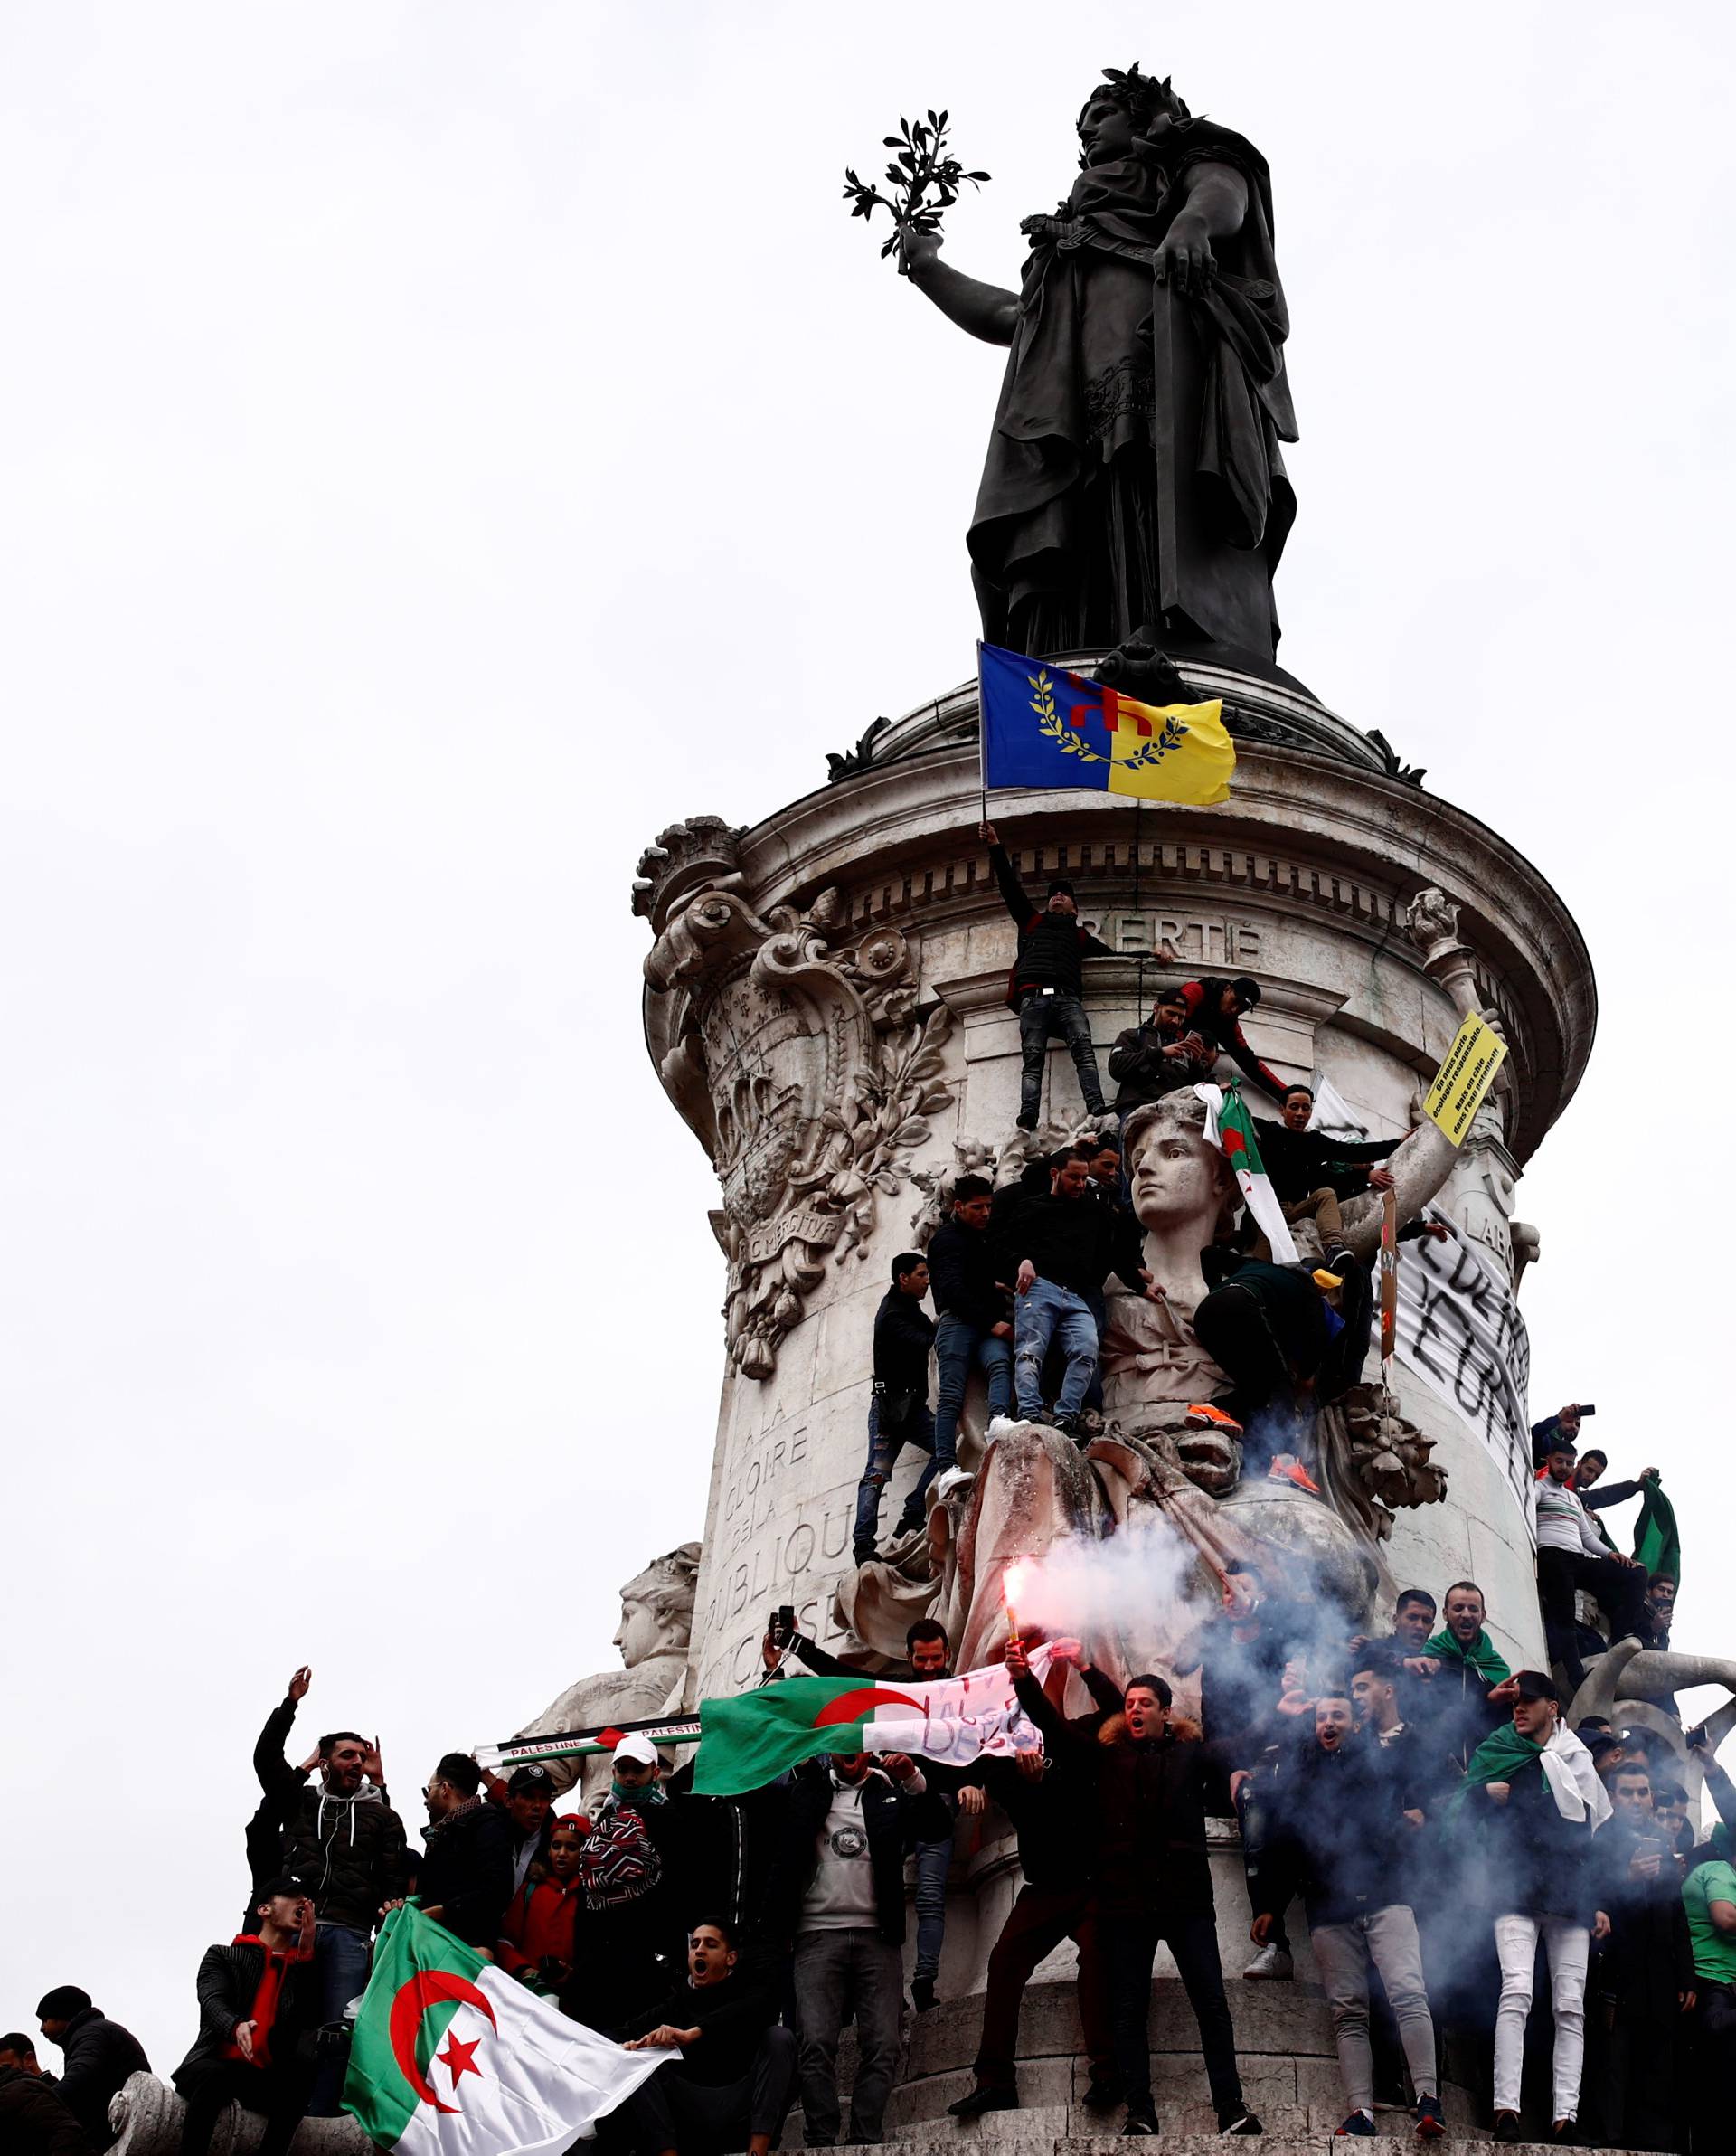 Demonstrators stand on the Monument to the Republic during a protest against Algerian President Abdelaziz Bouteflika seeking a fifth term in a presidential election in Paris